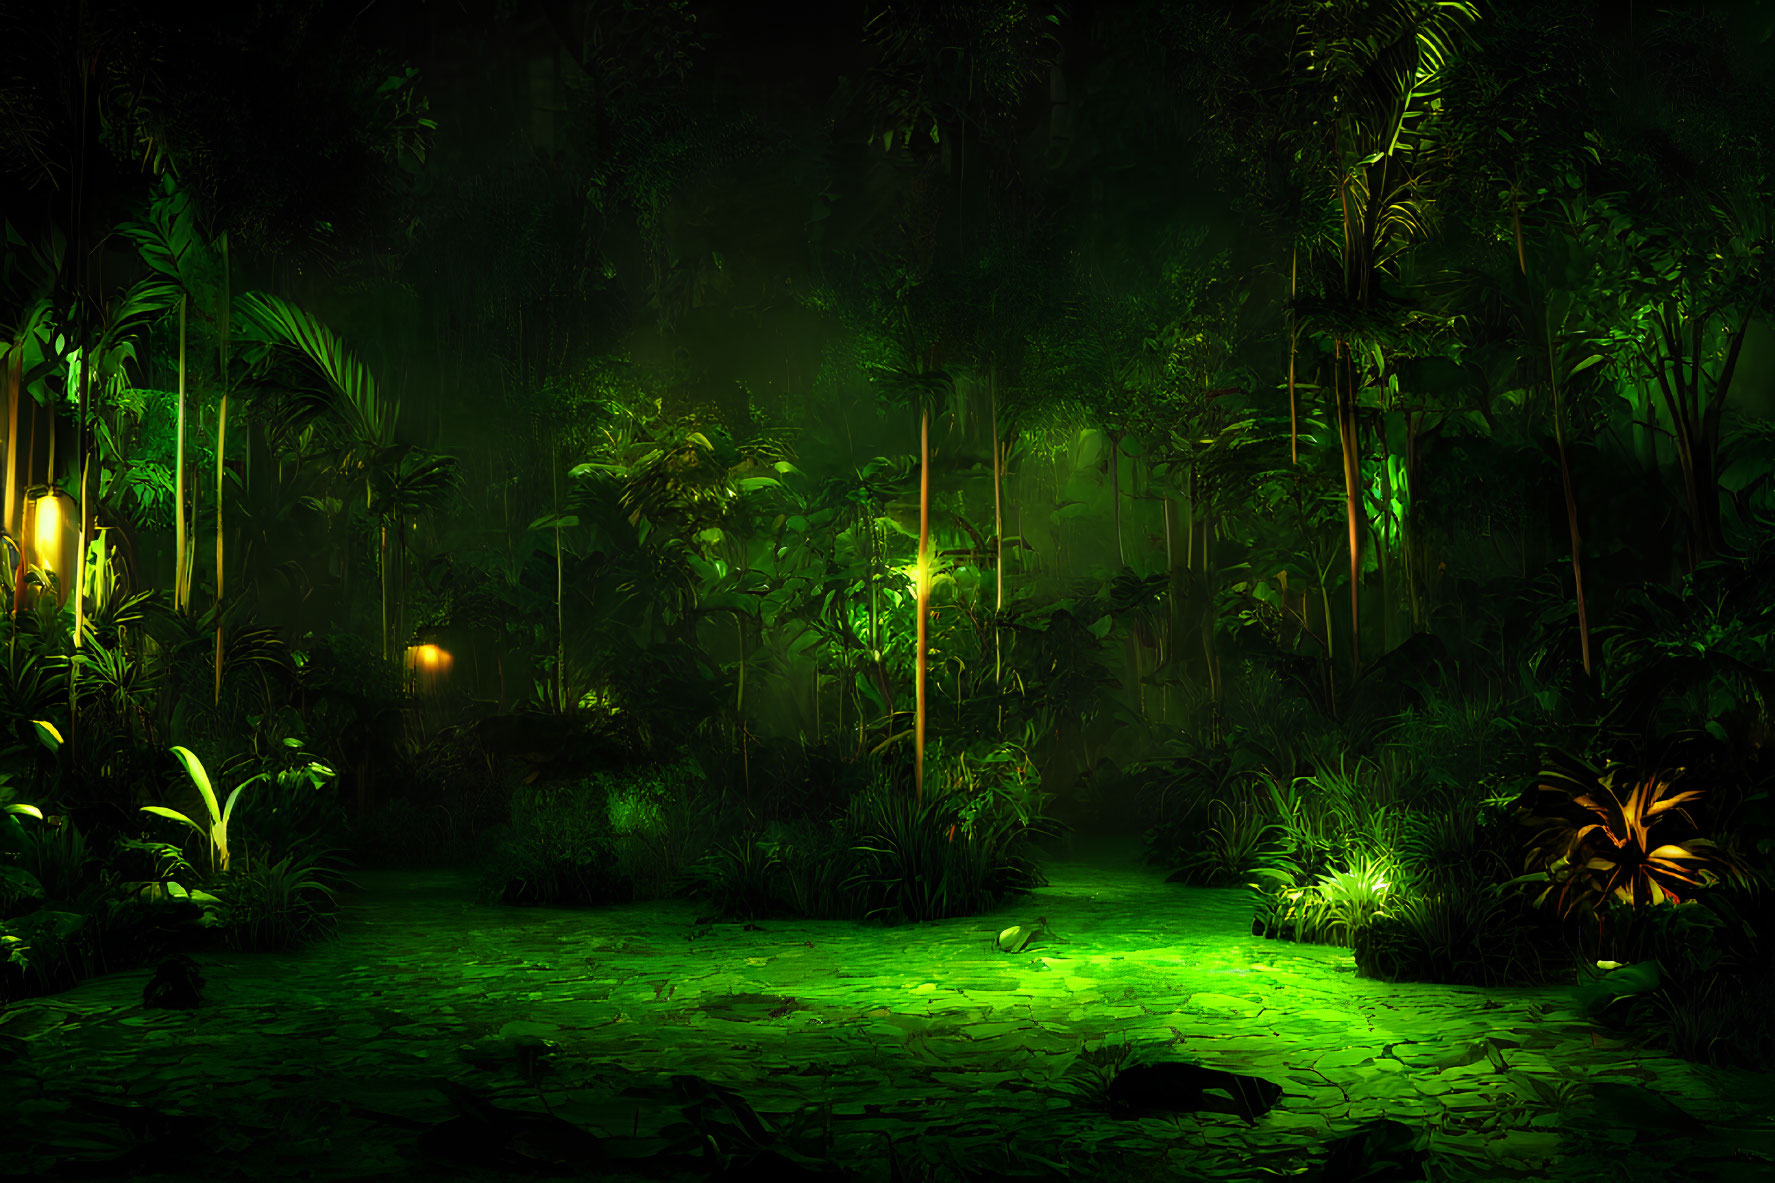 Dark forest at night with glowing green lights and thick foliage